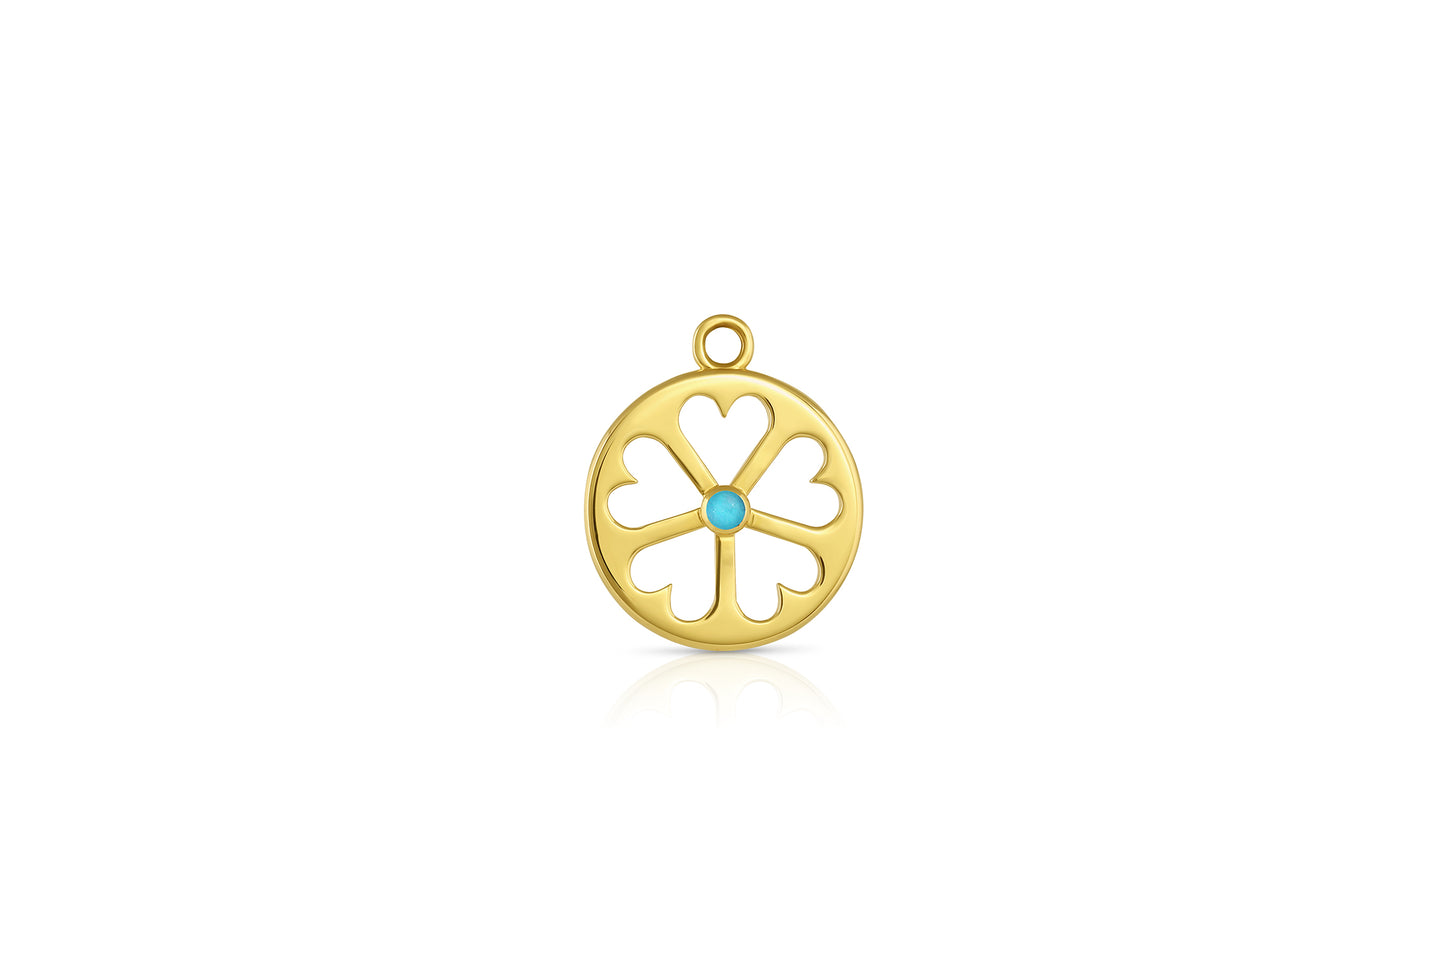 18k yellow gold circle pendant with heart cut outs and turquoise center stone on white background.